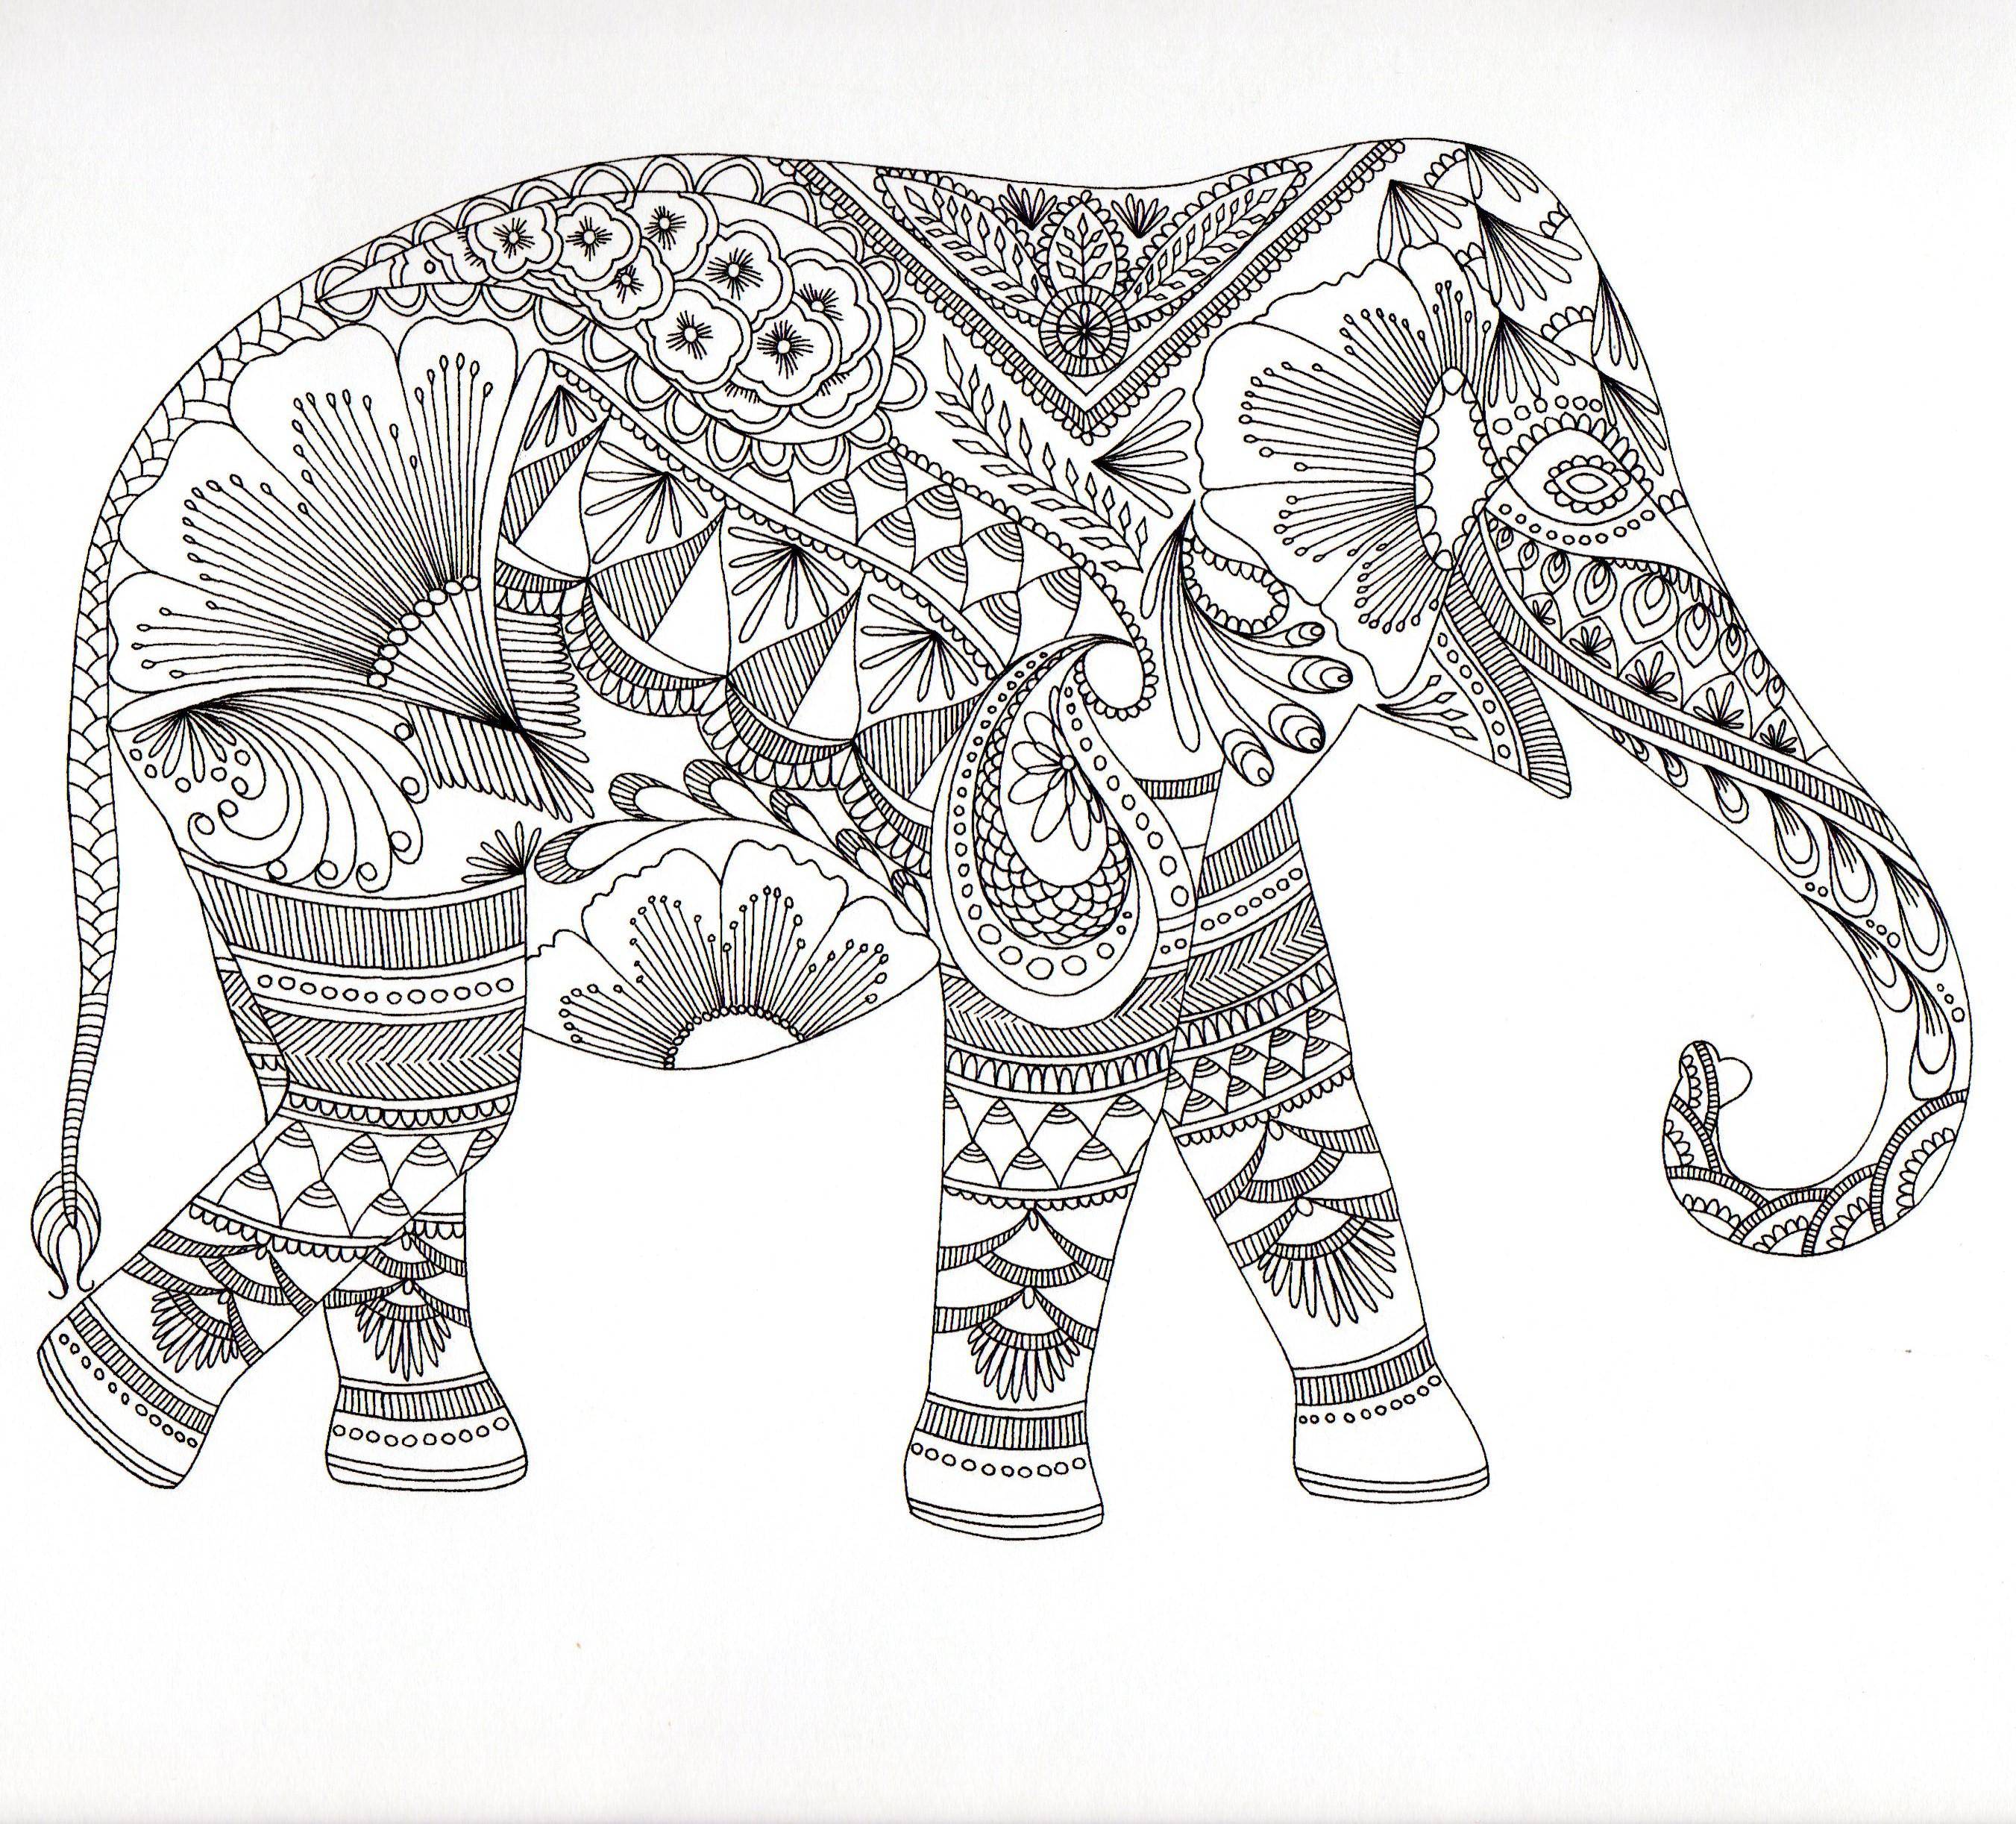 Coloring Elephant and patterns. Category Animals. Tags:  the elephant, patterns, trunk.